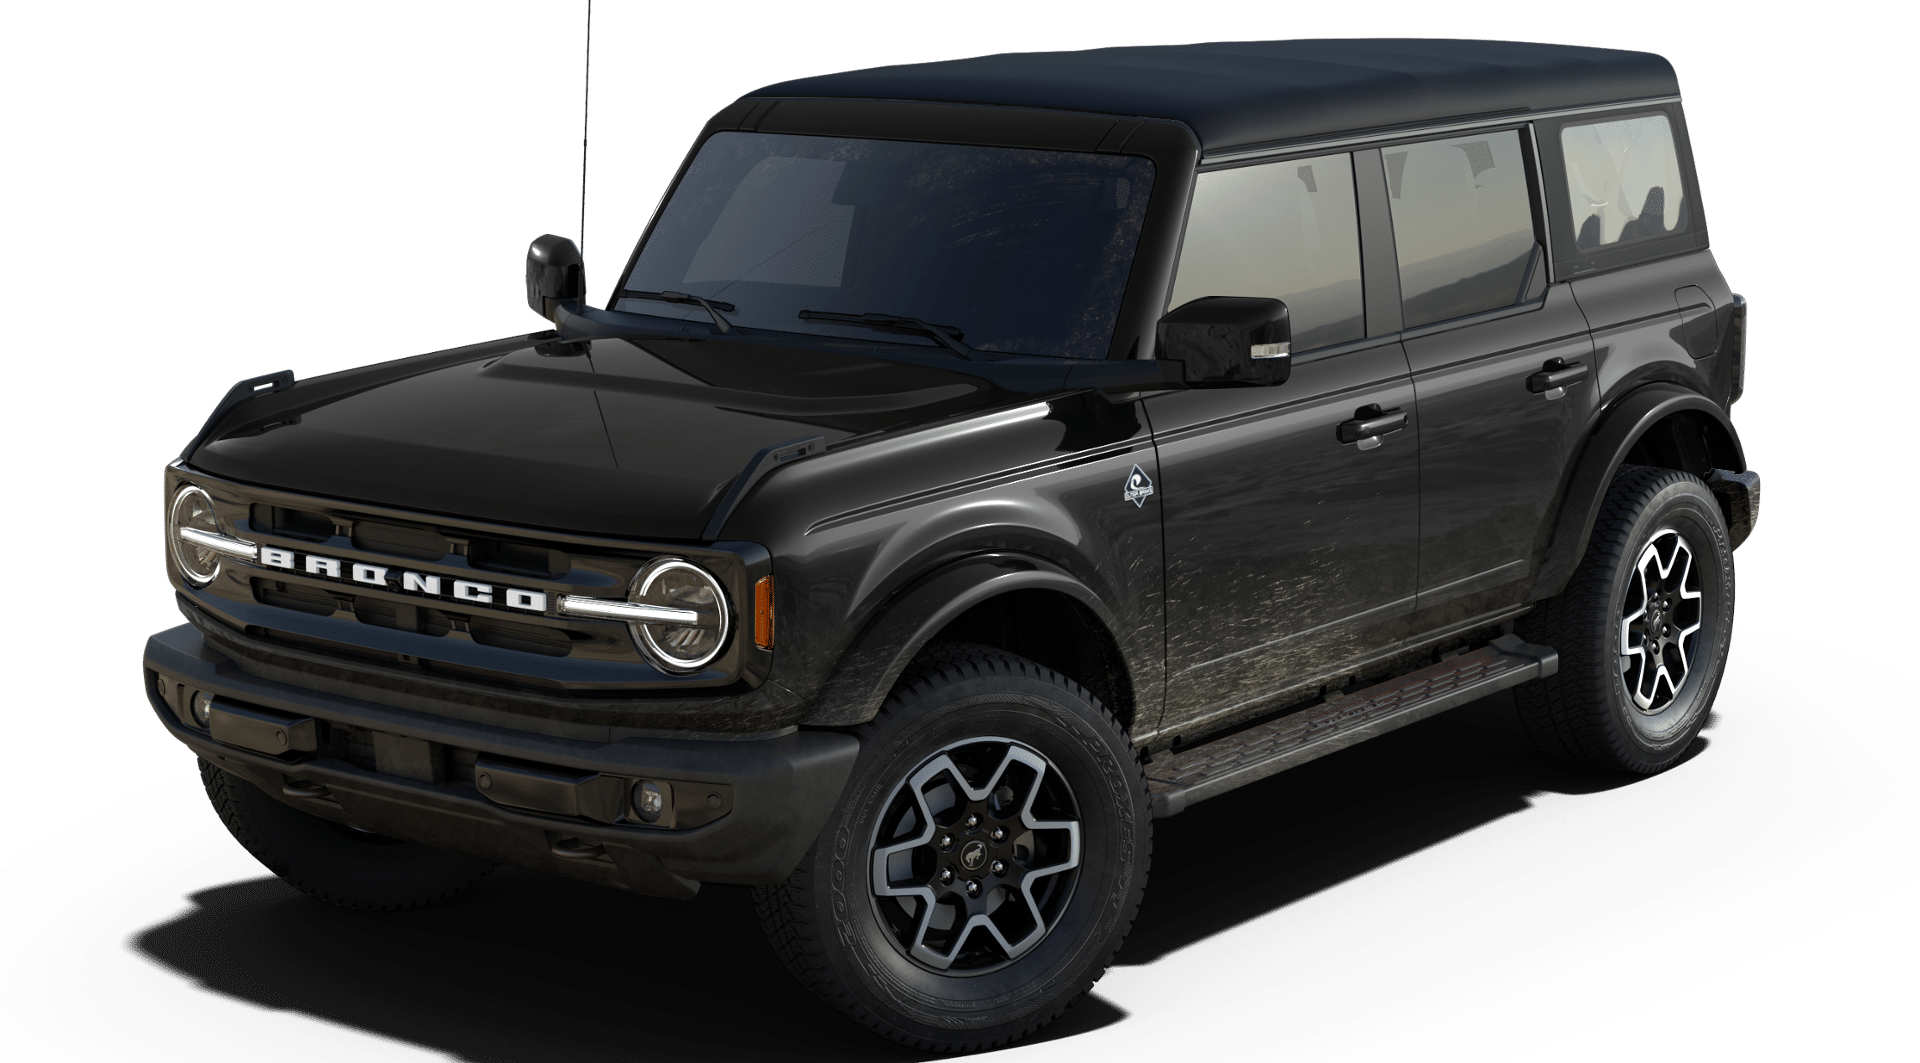 New 2022 Ford Bronco Convertible Stock: 104020